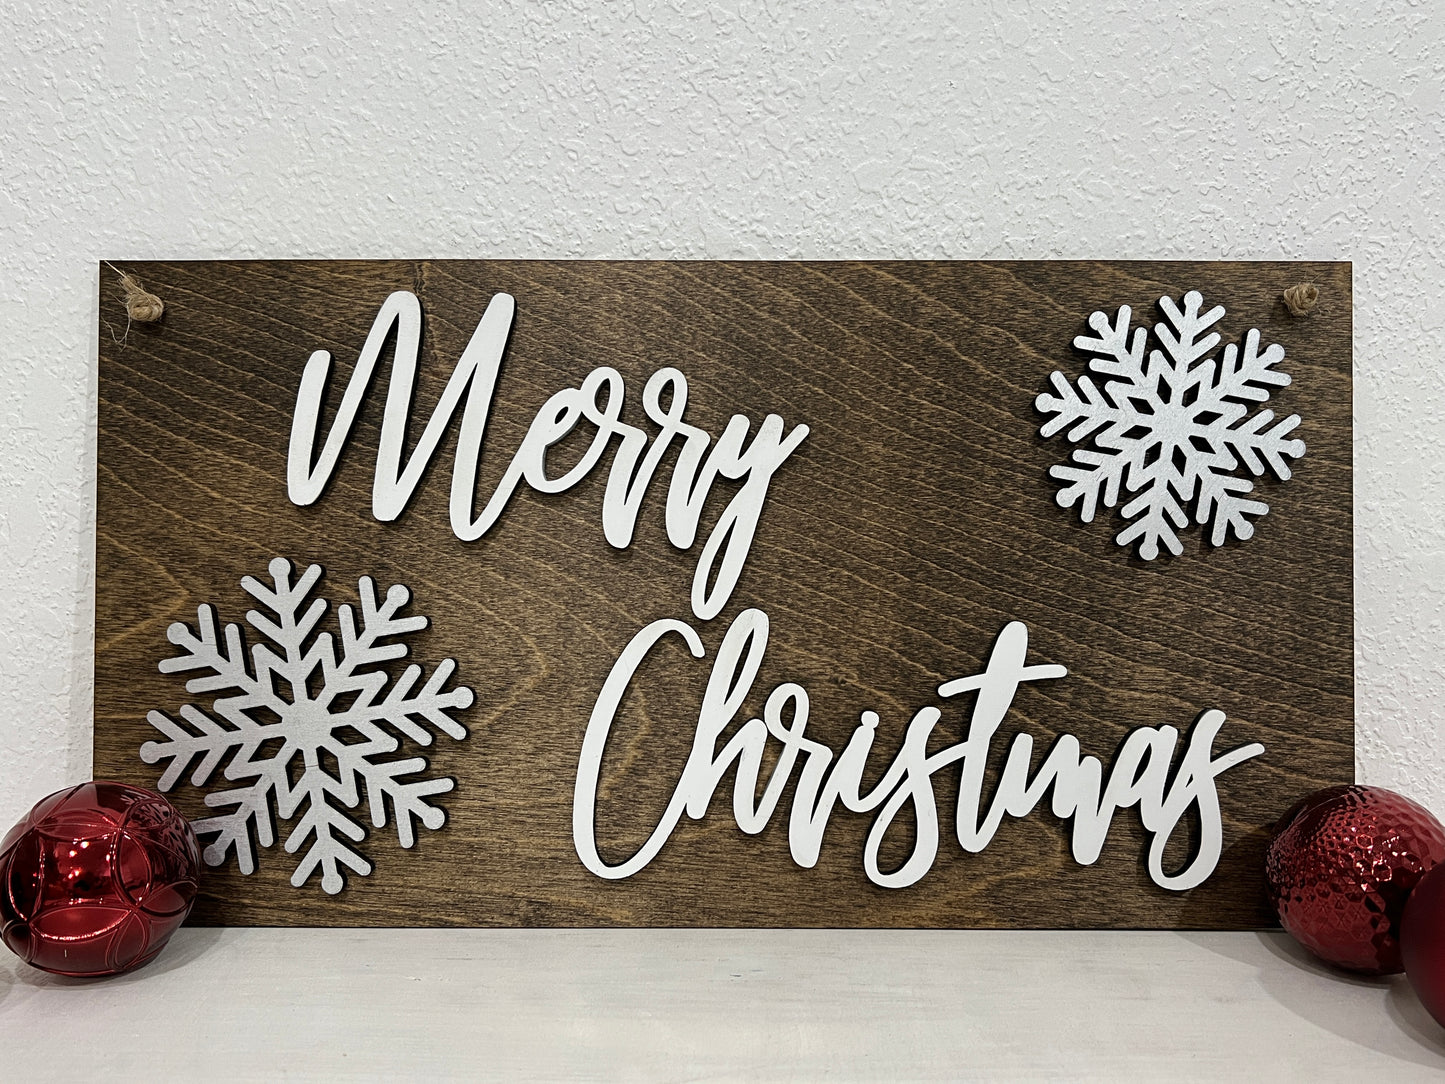 3D Merry Christmas sign - snowflake Christmas decorations - Rustic Christmas Signs - Celebrating Together